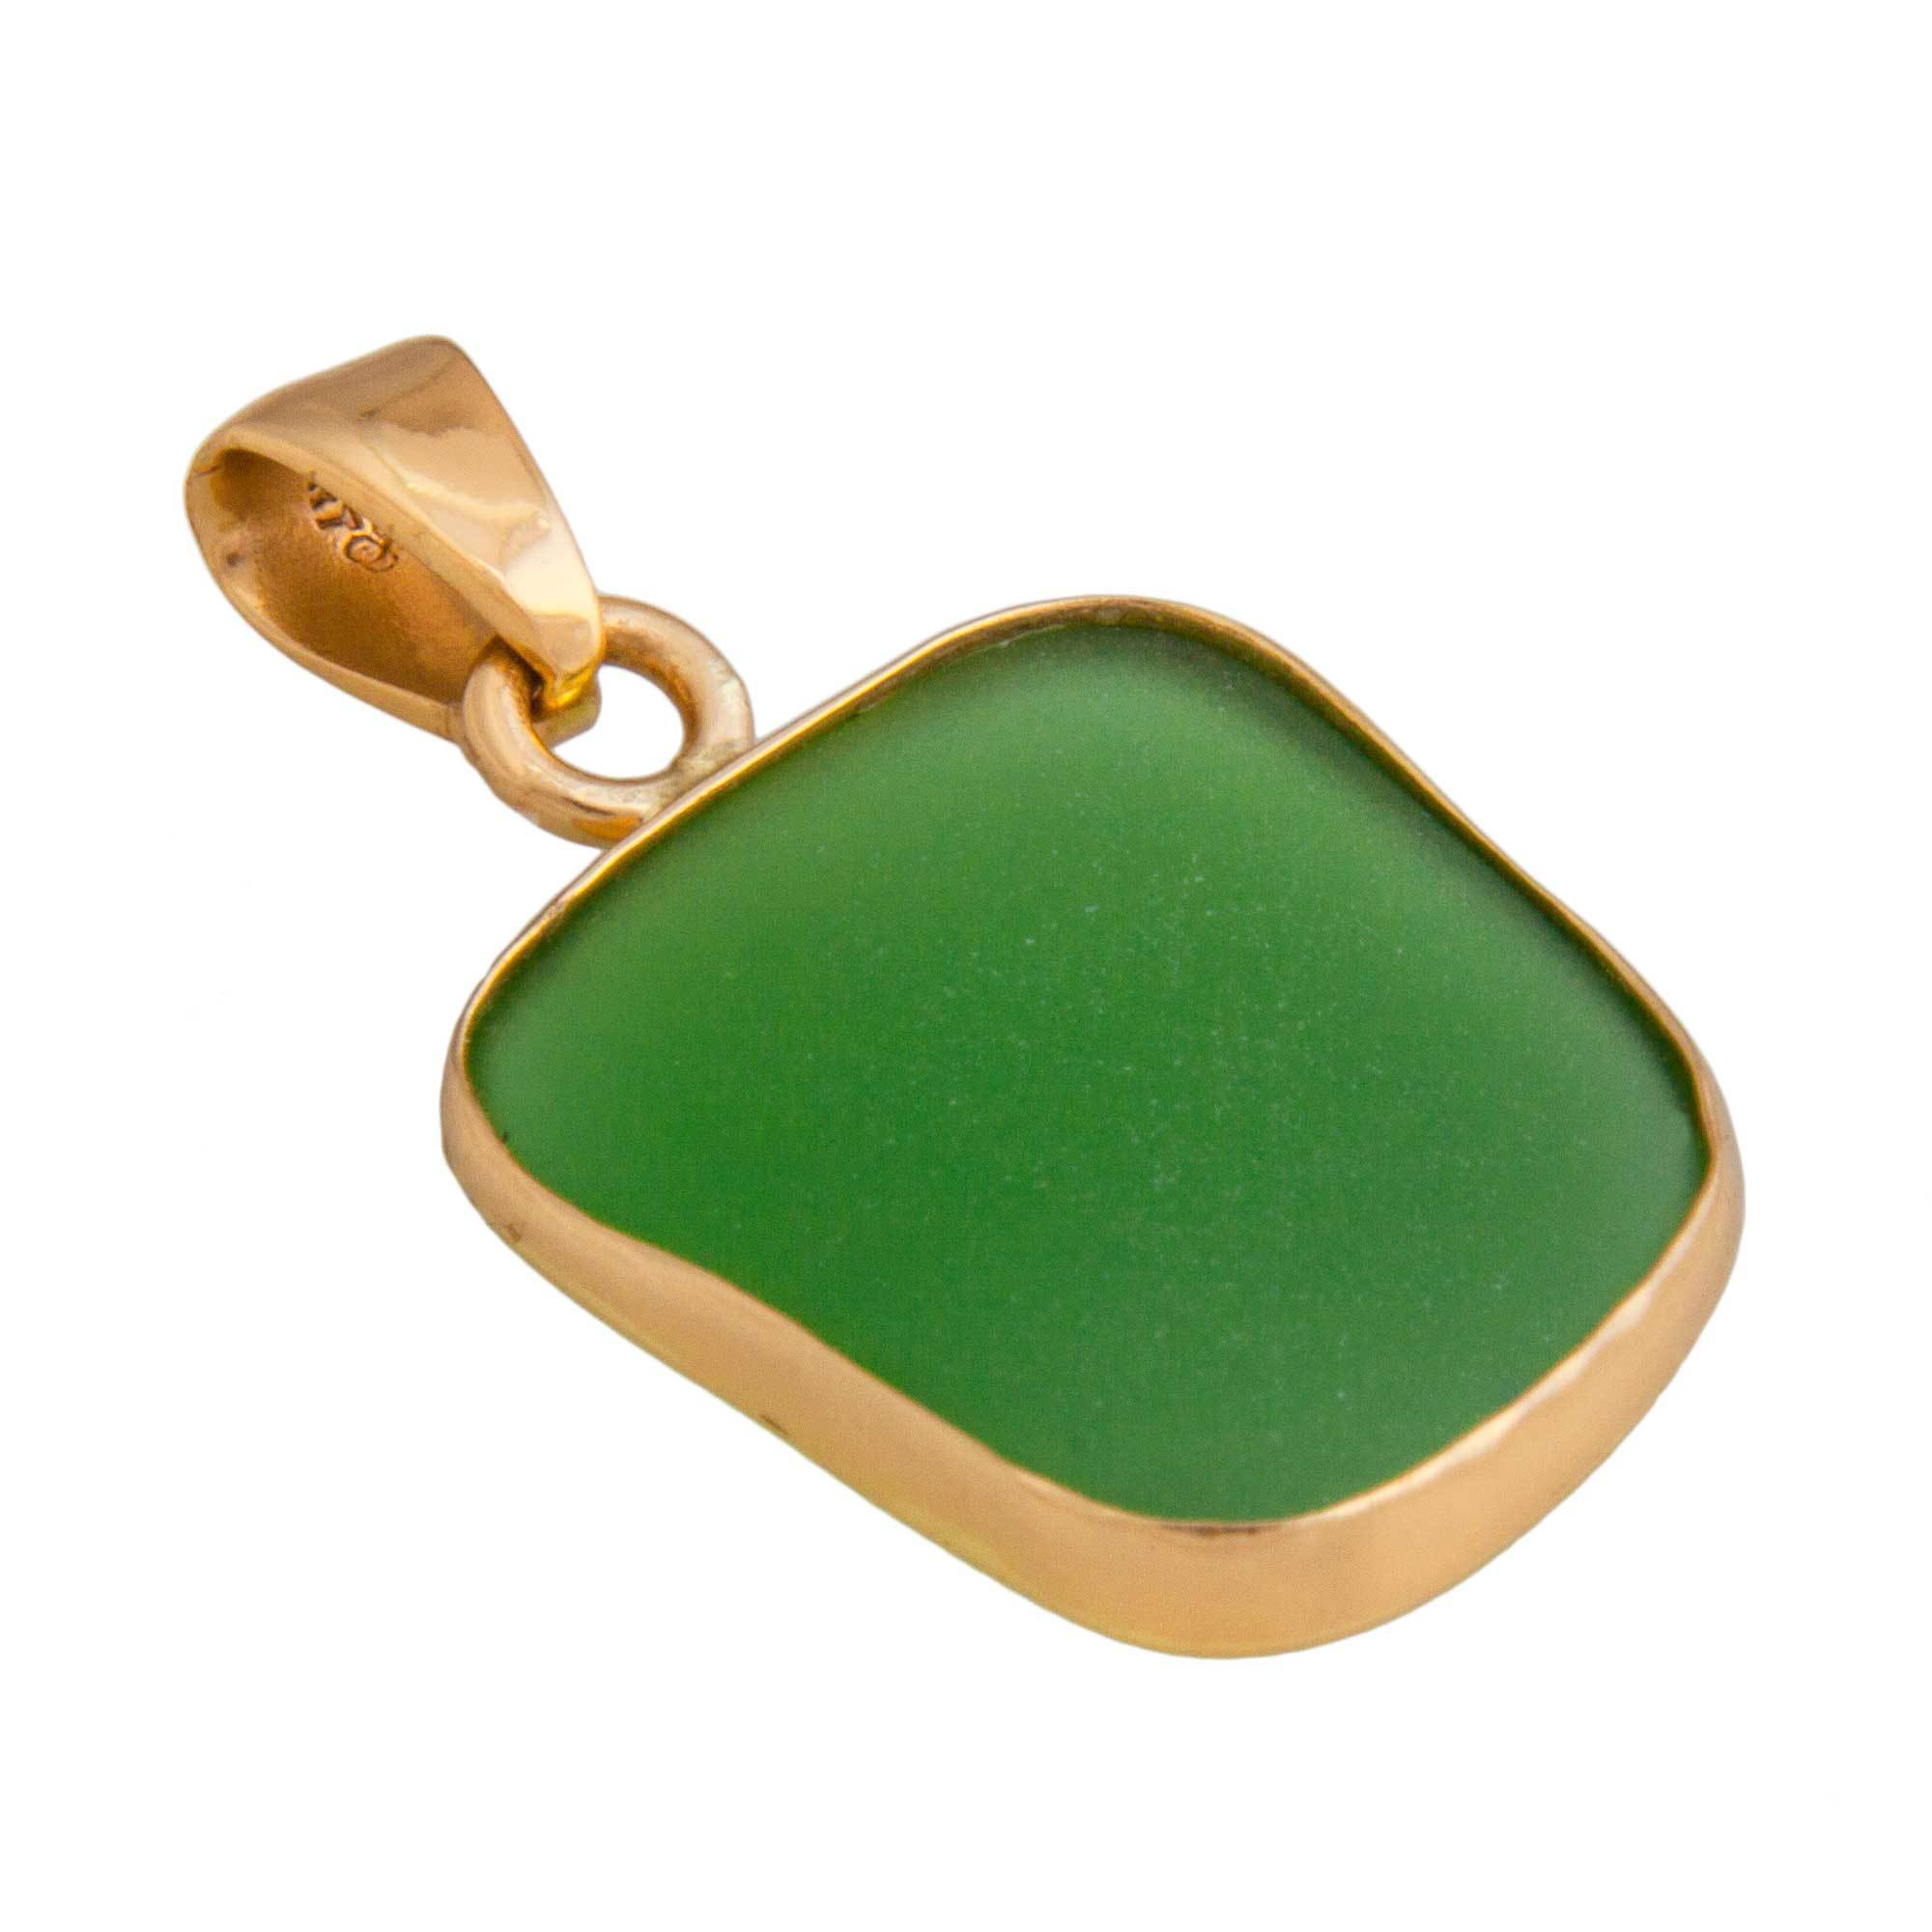 Charles Albert Jewelry - Alchemia Green Recycled Glass Pendant - Side View